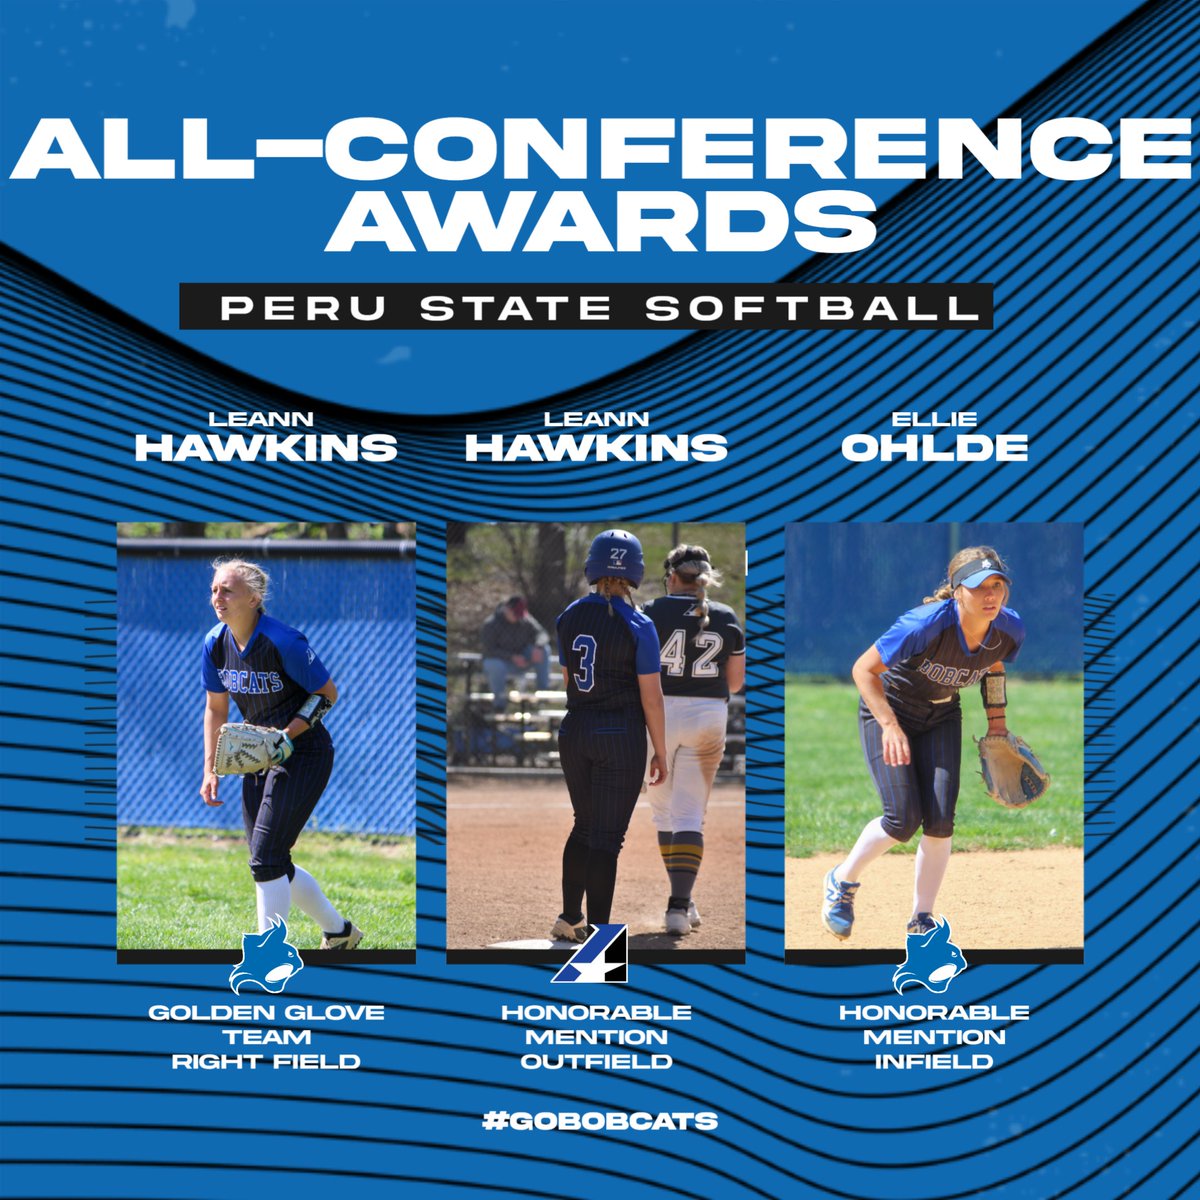 Congratulations to Leann and Ellie on earning Softball All-Conference Awards! #ClawsOut | #PeruState156